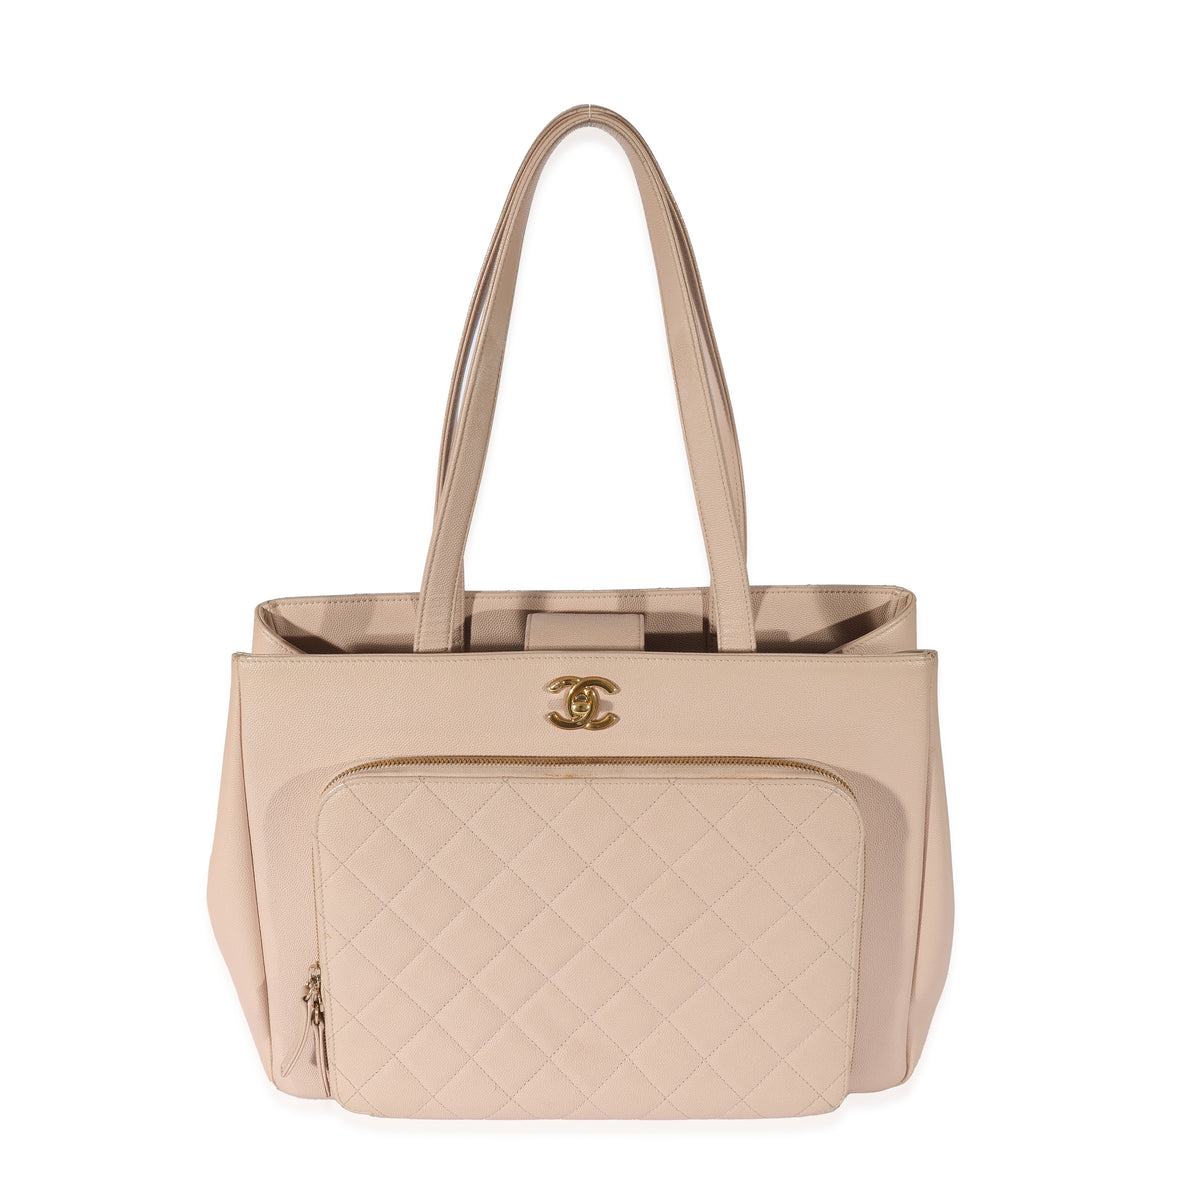 Chanel Business Affinity Flap Bag Quilted Caviar Medium Beige